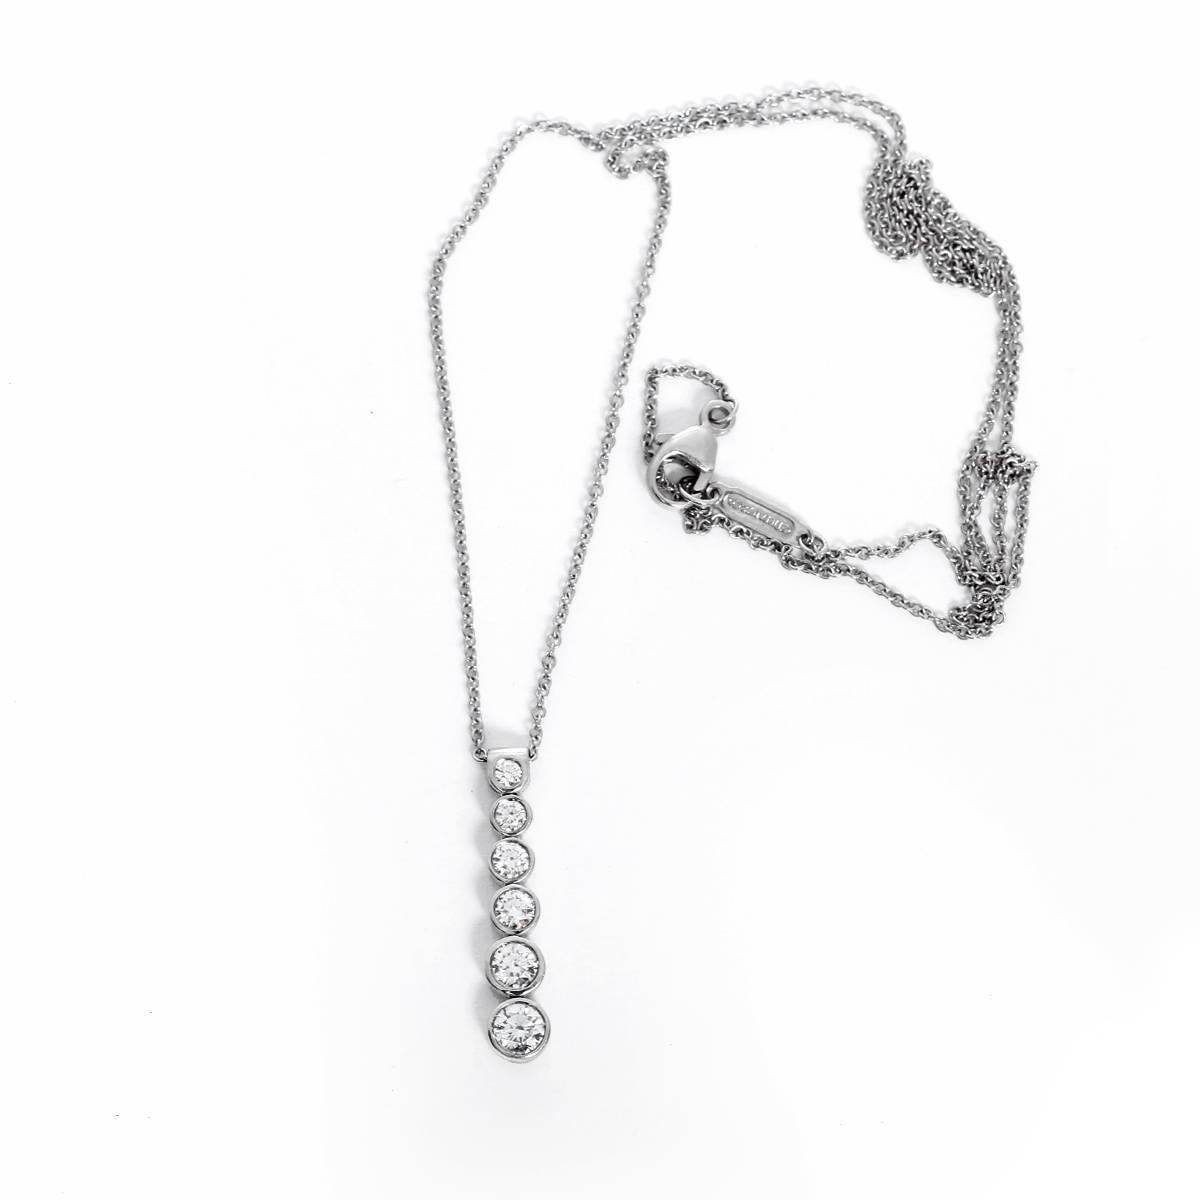 This Tiffany & Co. necklace features a pendant with diamonds set in platinum. Pendant measures apx. 7/8-inch in length on an 18-inch platinum chain. Total weight is 4.8 grams.